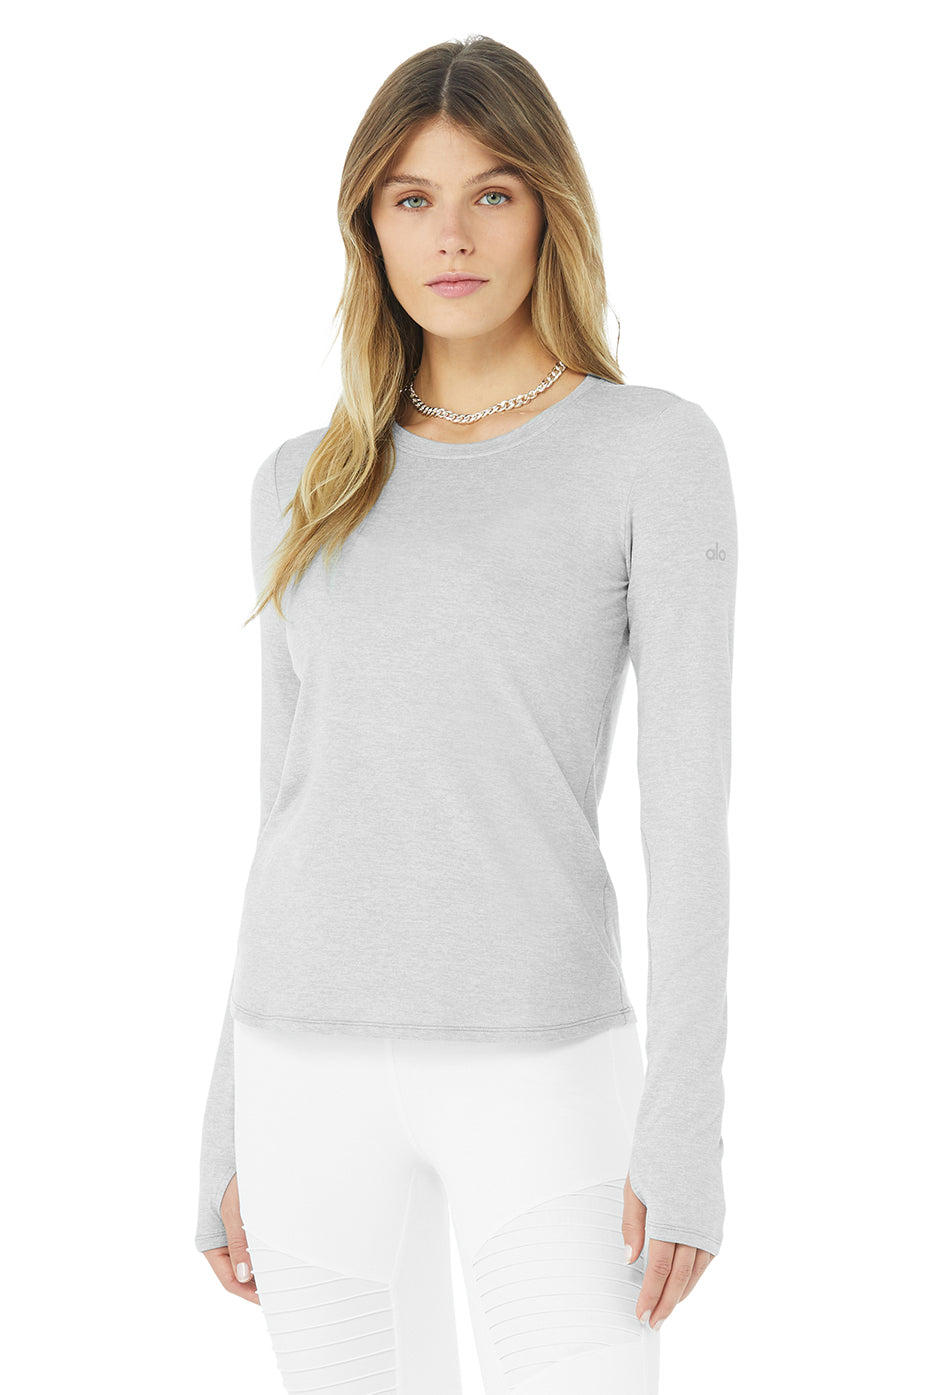 Alosoft Finesse Long Sleeve Top in Athletic Heather Grey by Alo Yoga - Work  Well Daily